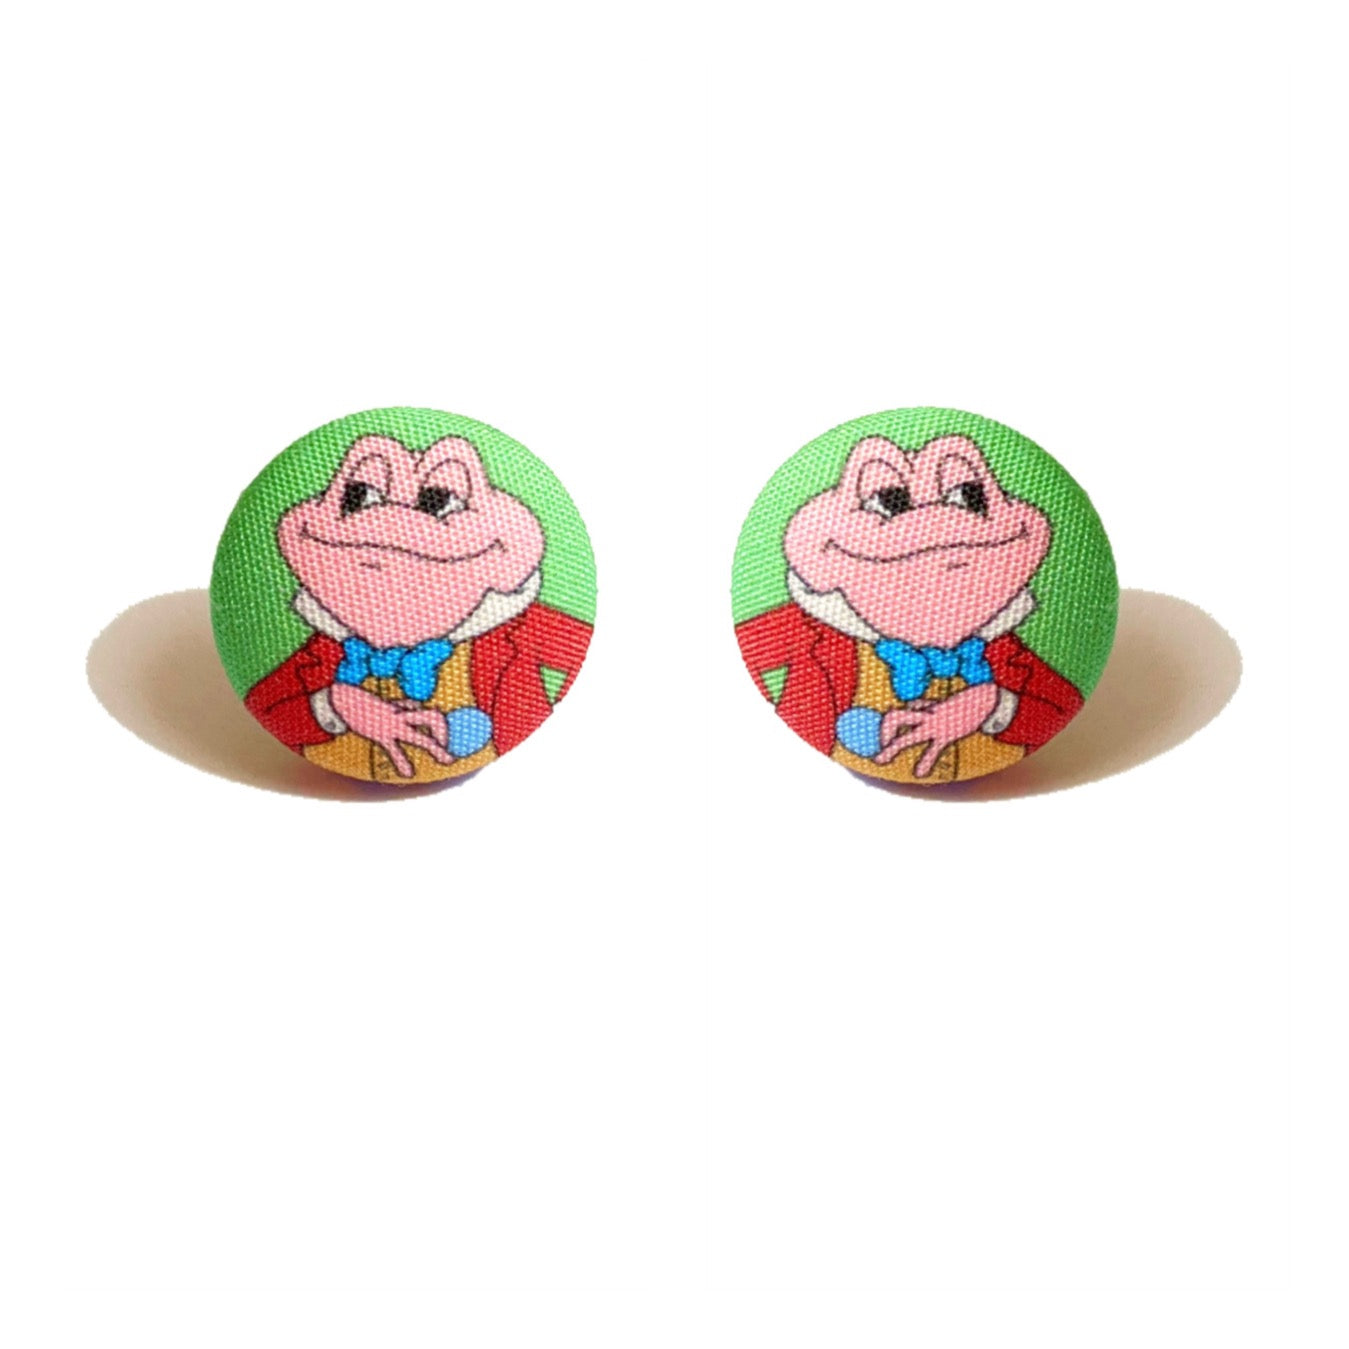 Mr. Toad Inspired Fabric Button Earrings